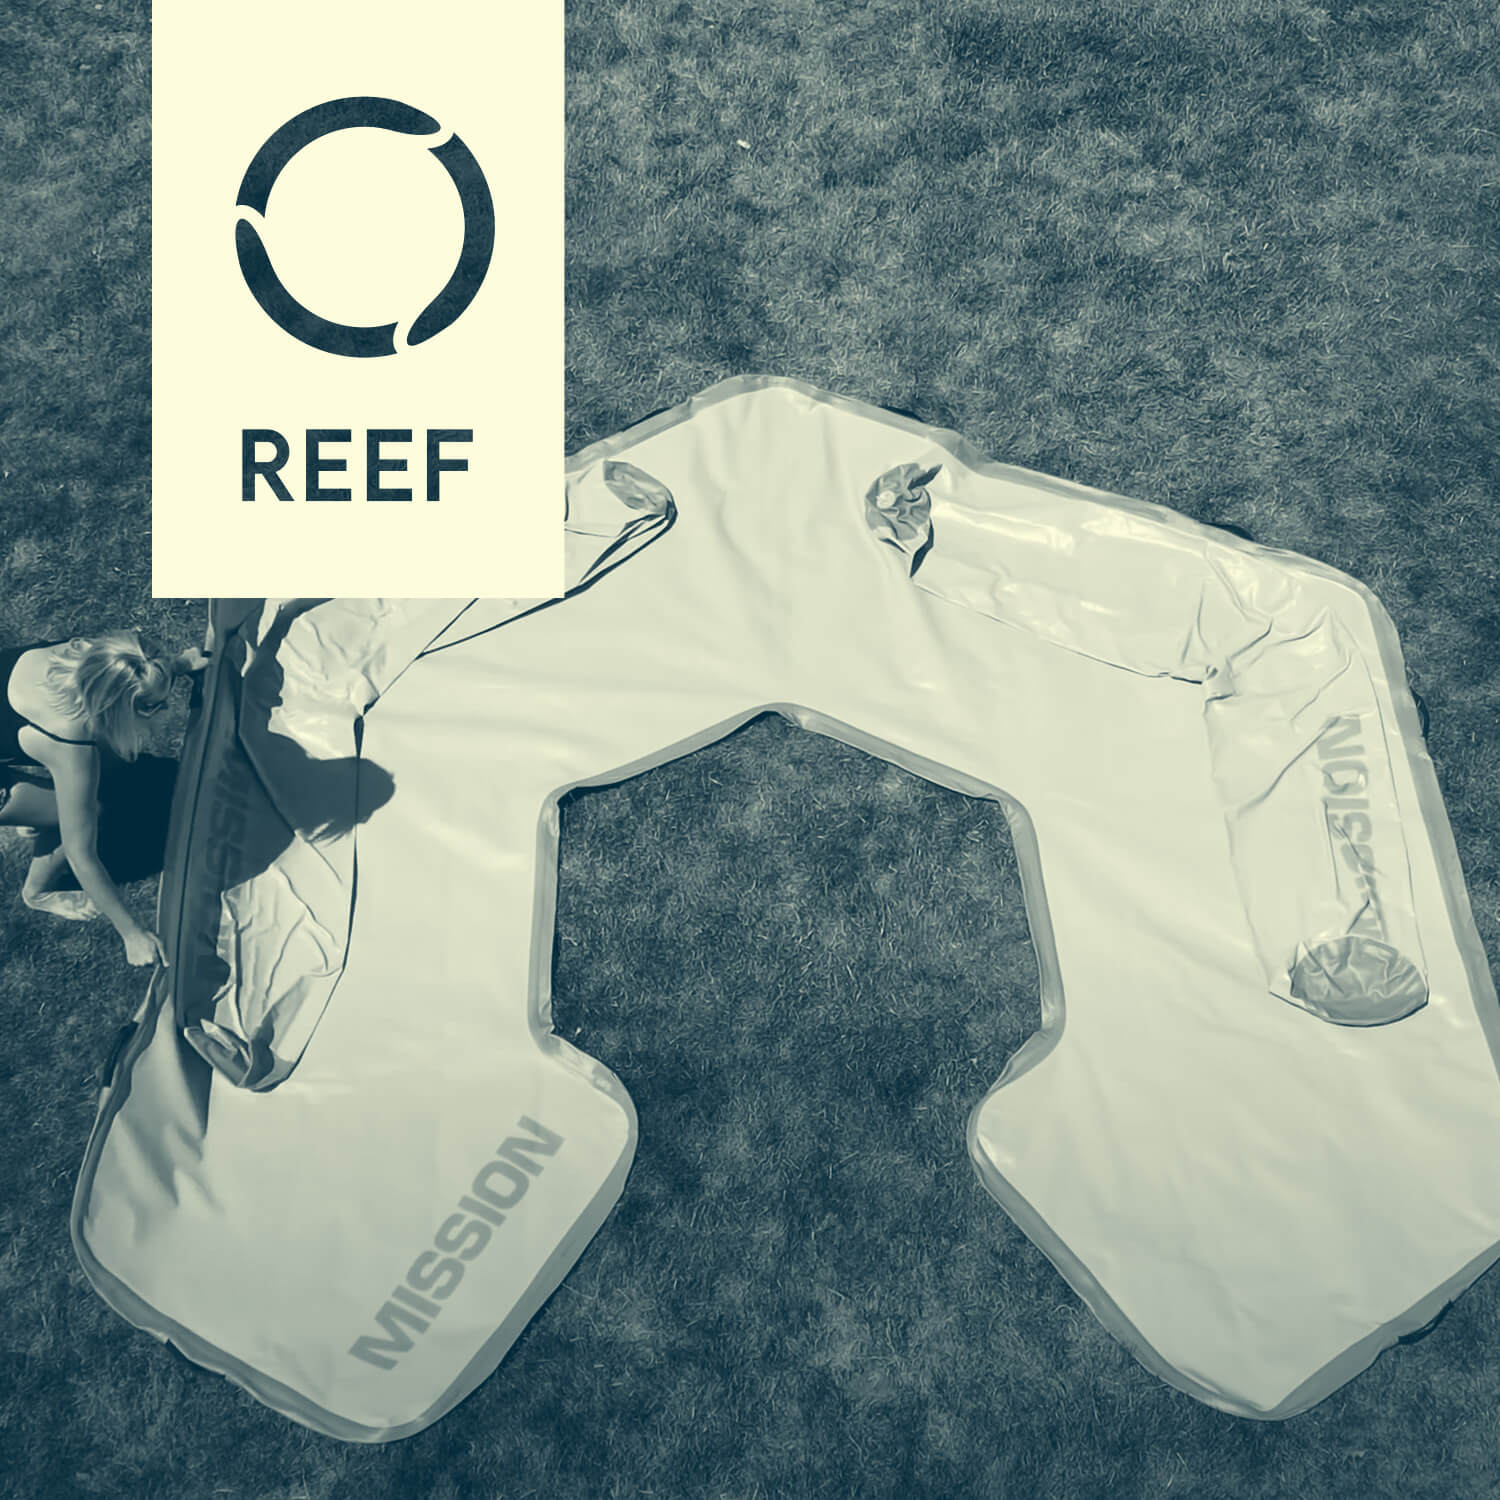 Folding your REEF Lounge